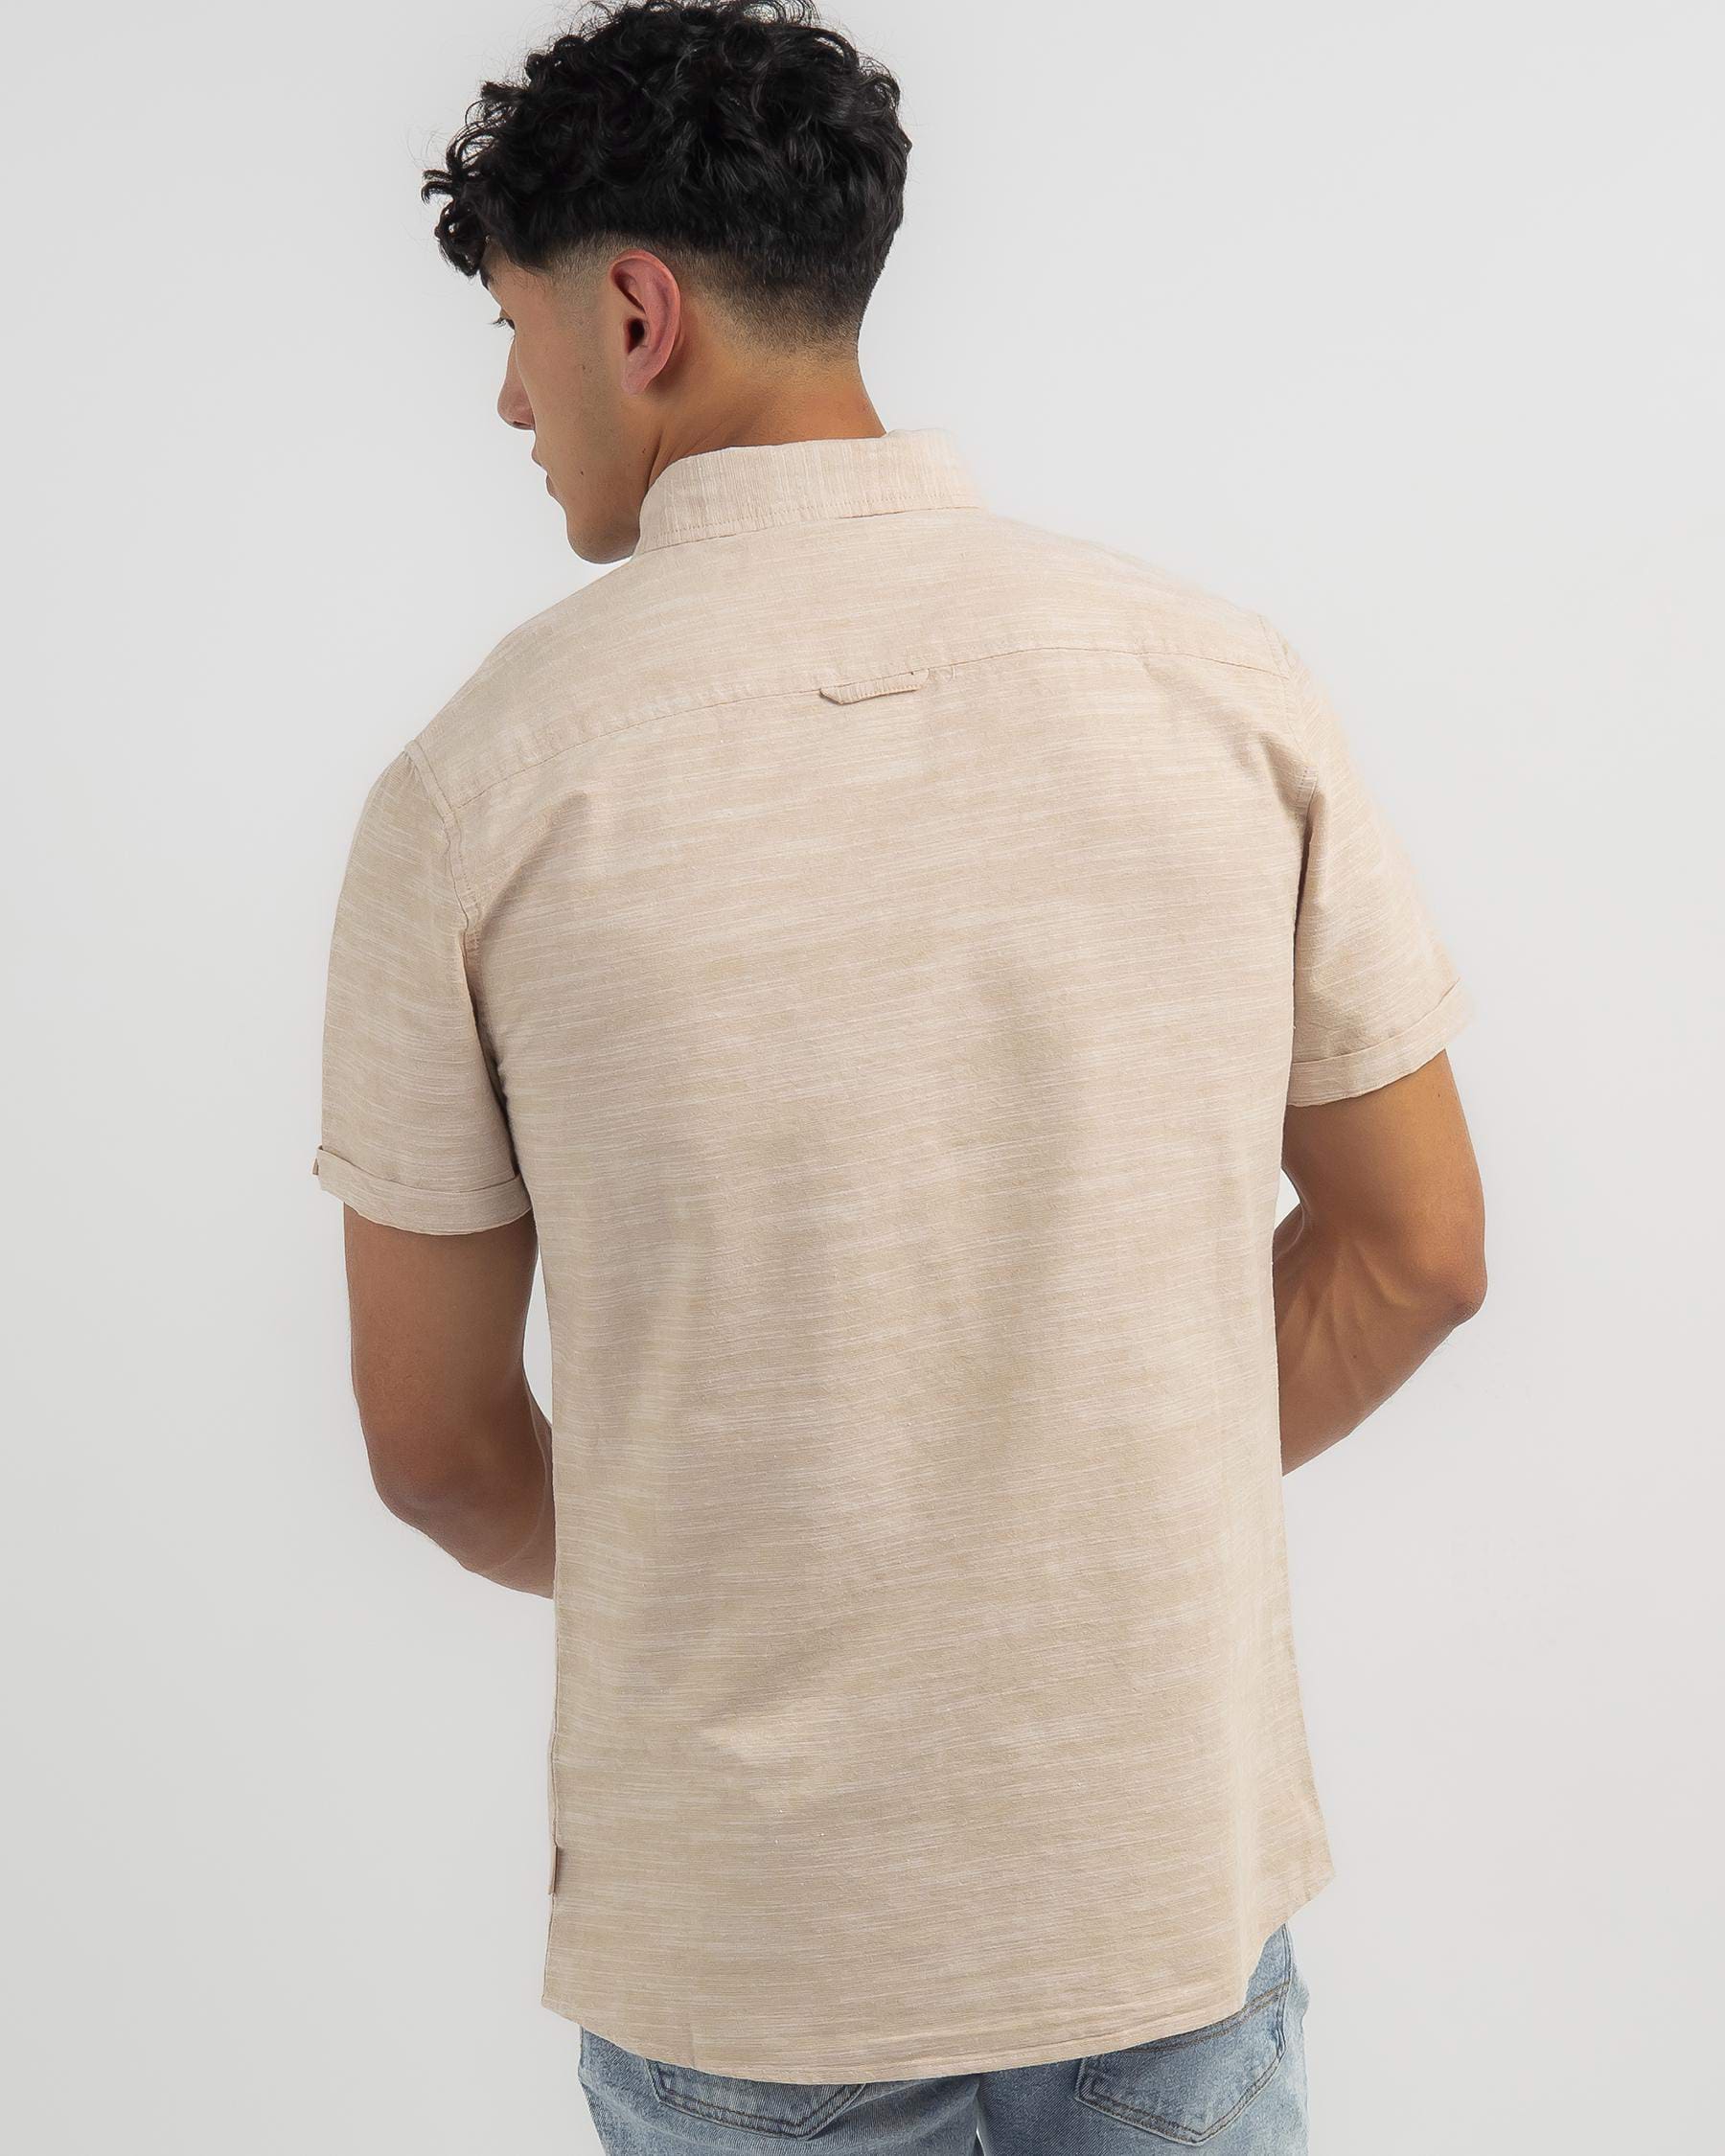 Shop Lucid Virtuous Short Sleeve Shirt In Tan - Fast Shipping & Easy ...